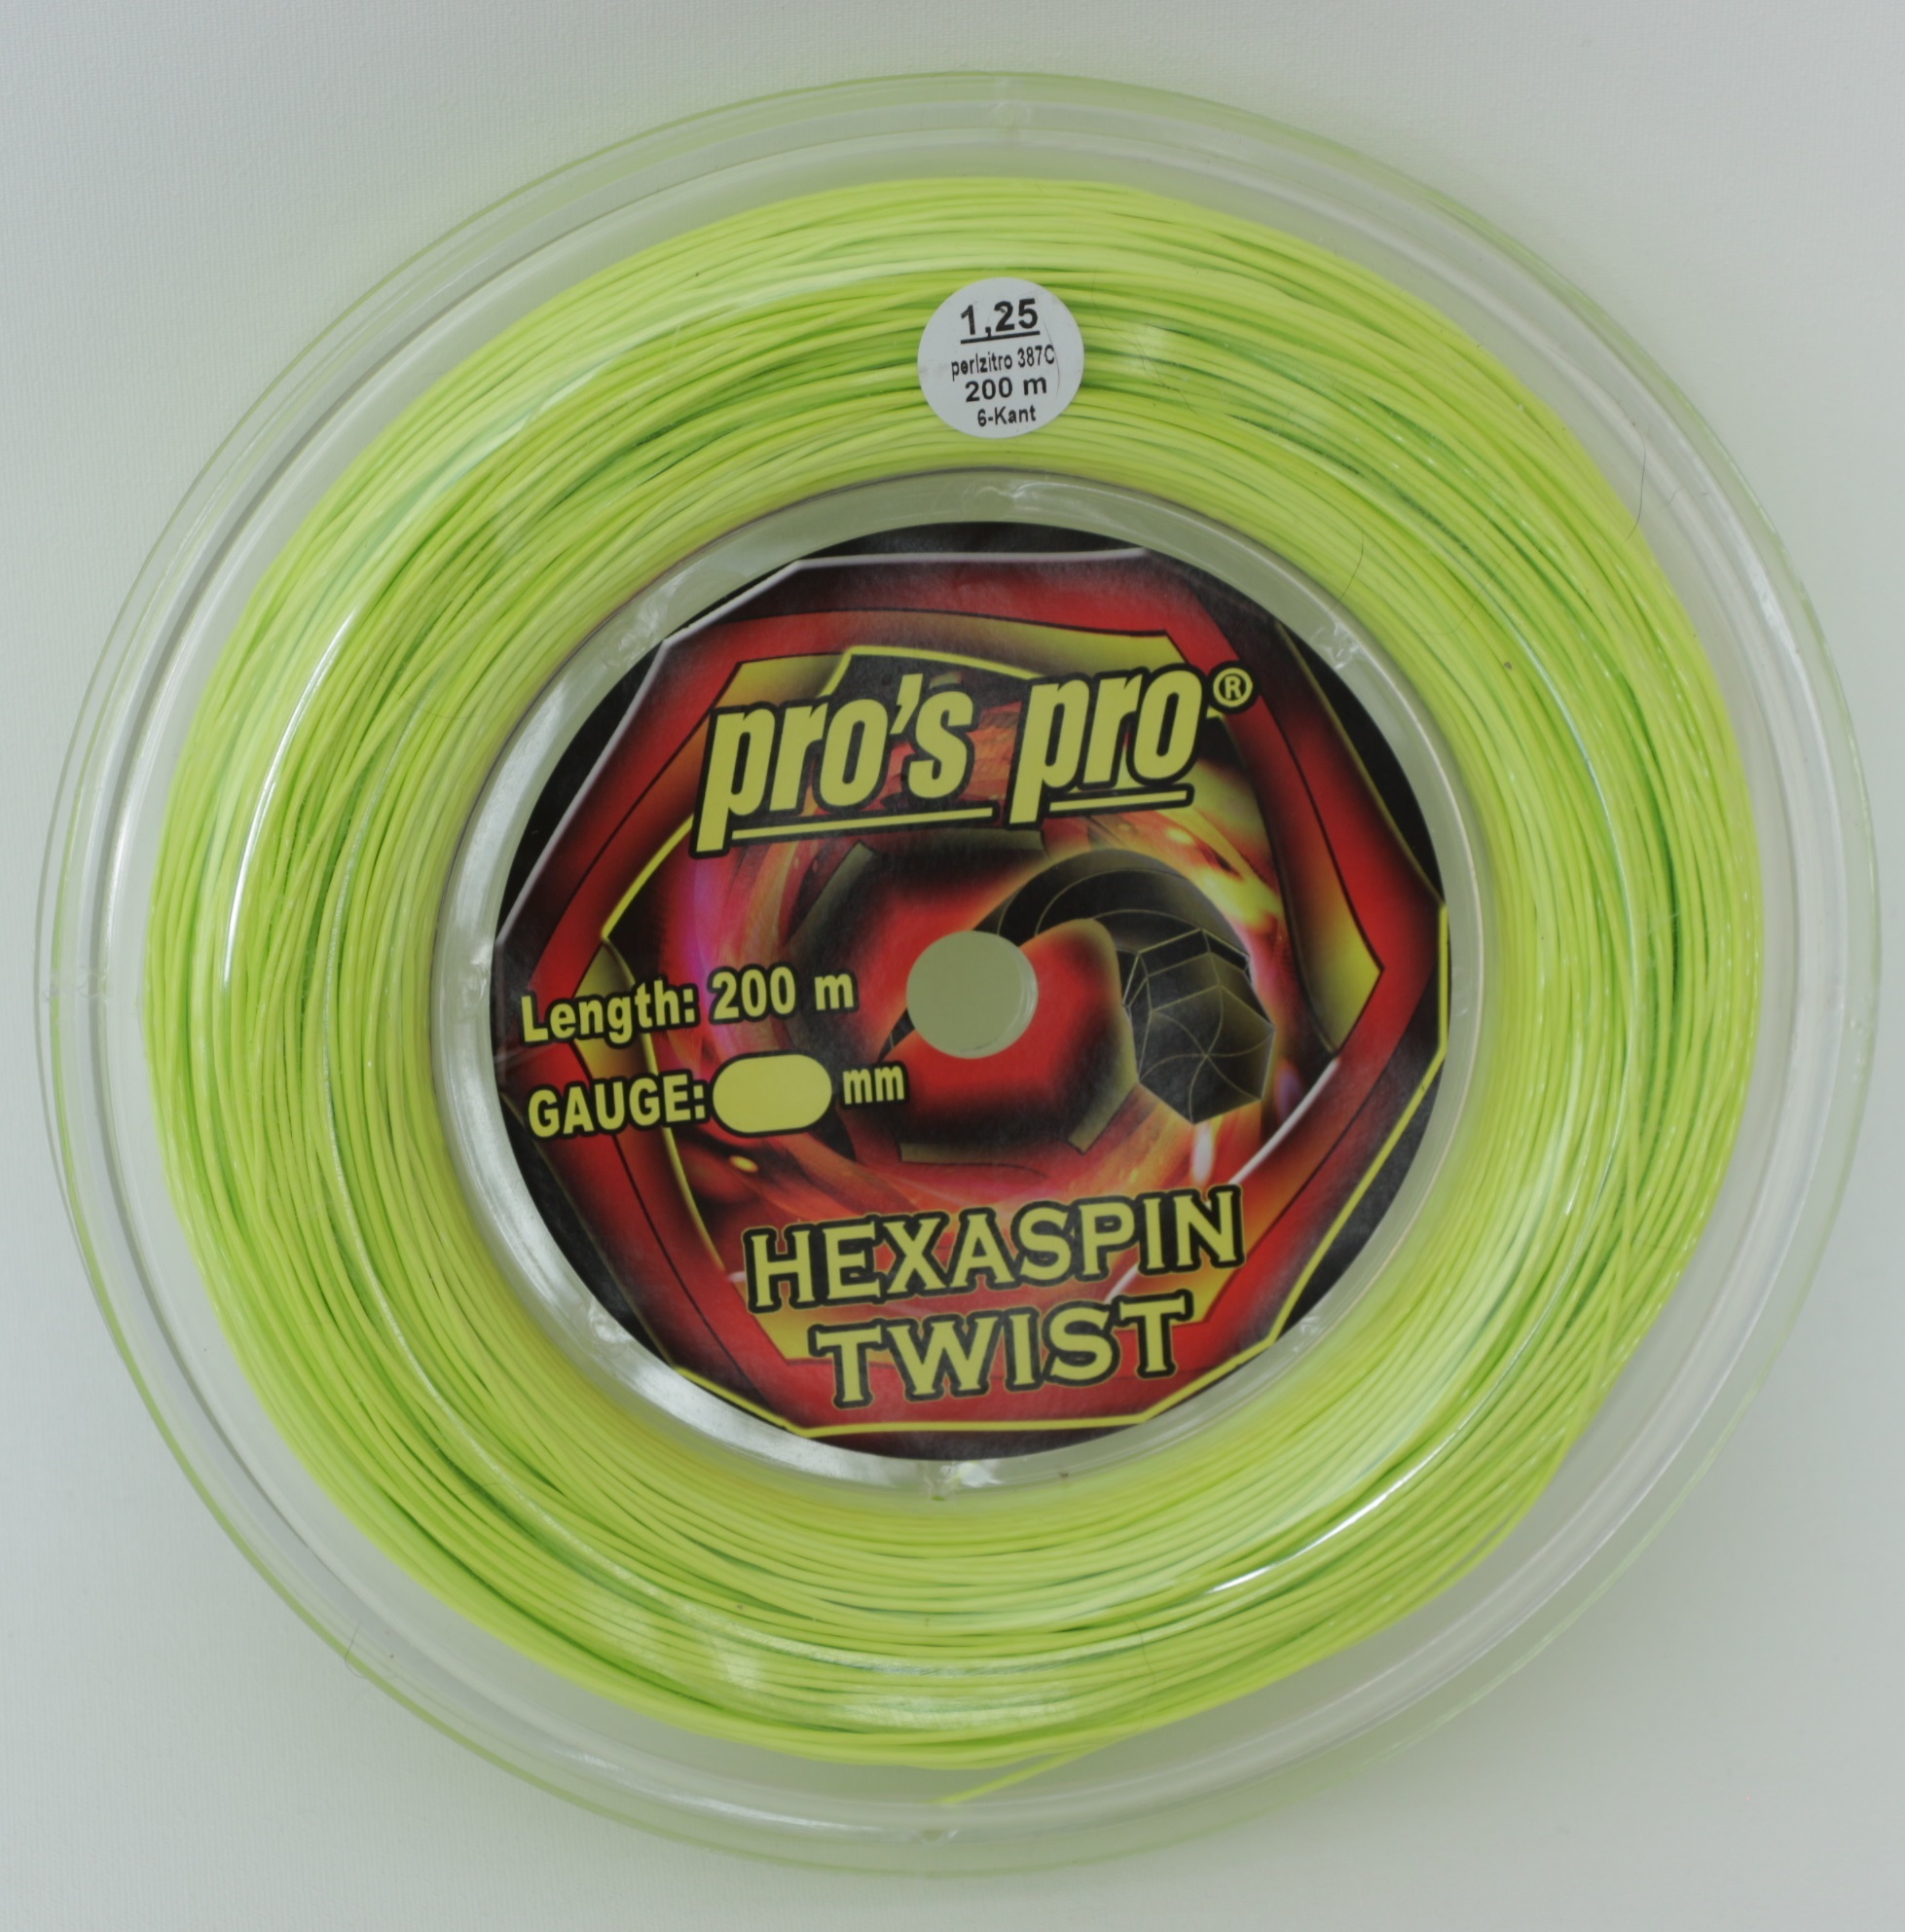 Pros Pro Hexaspin Twist lime 200m